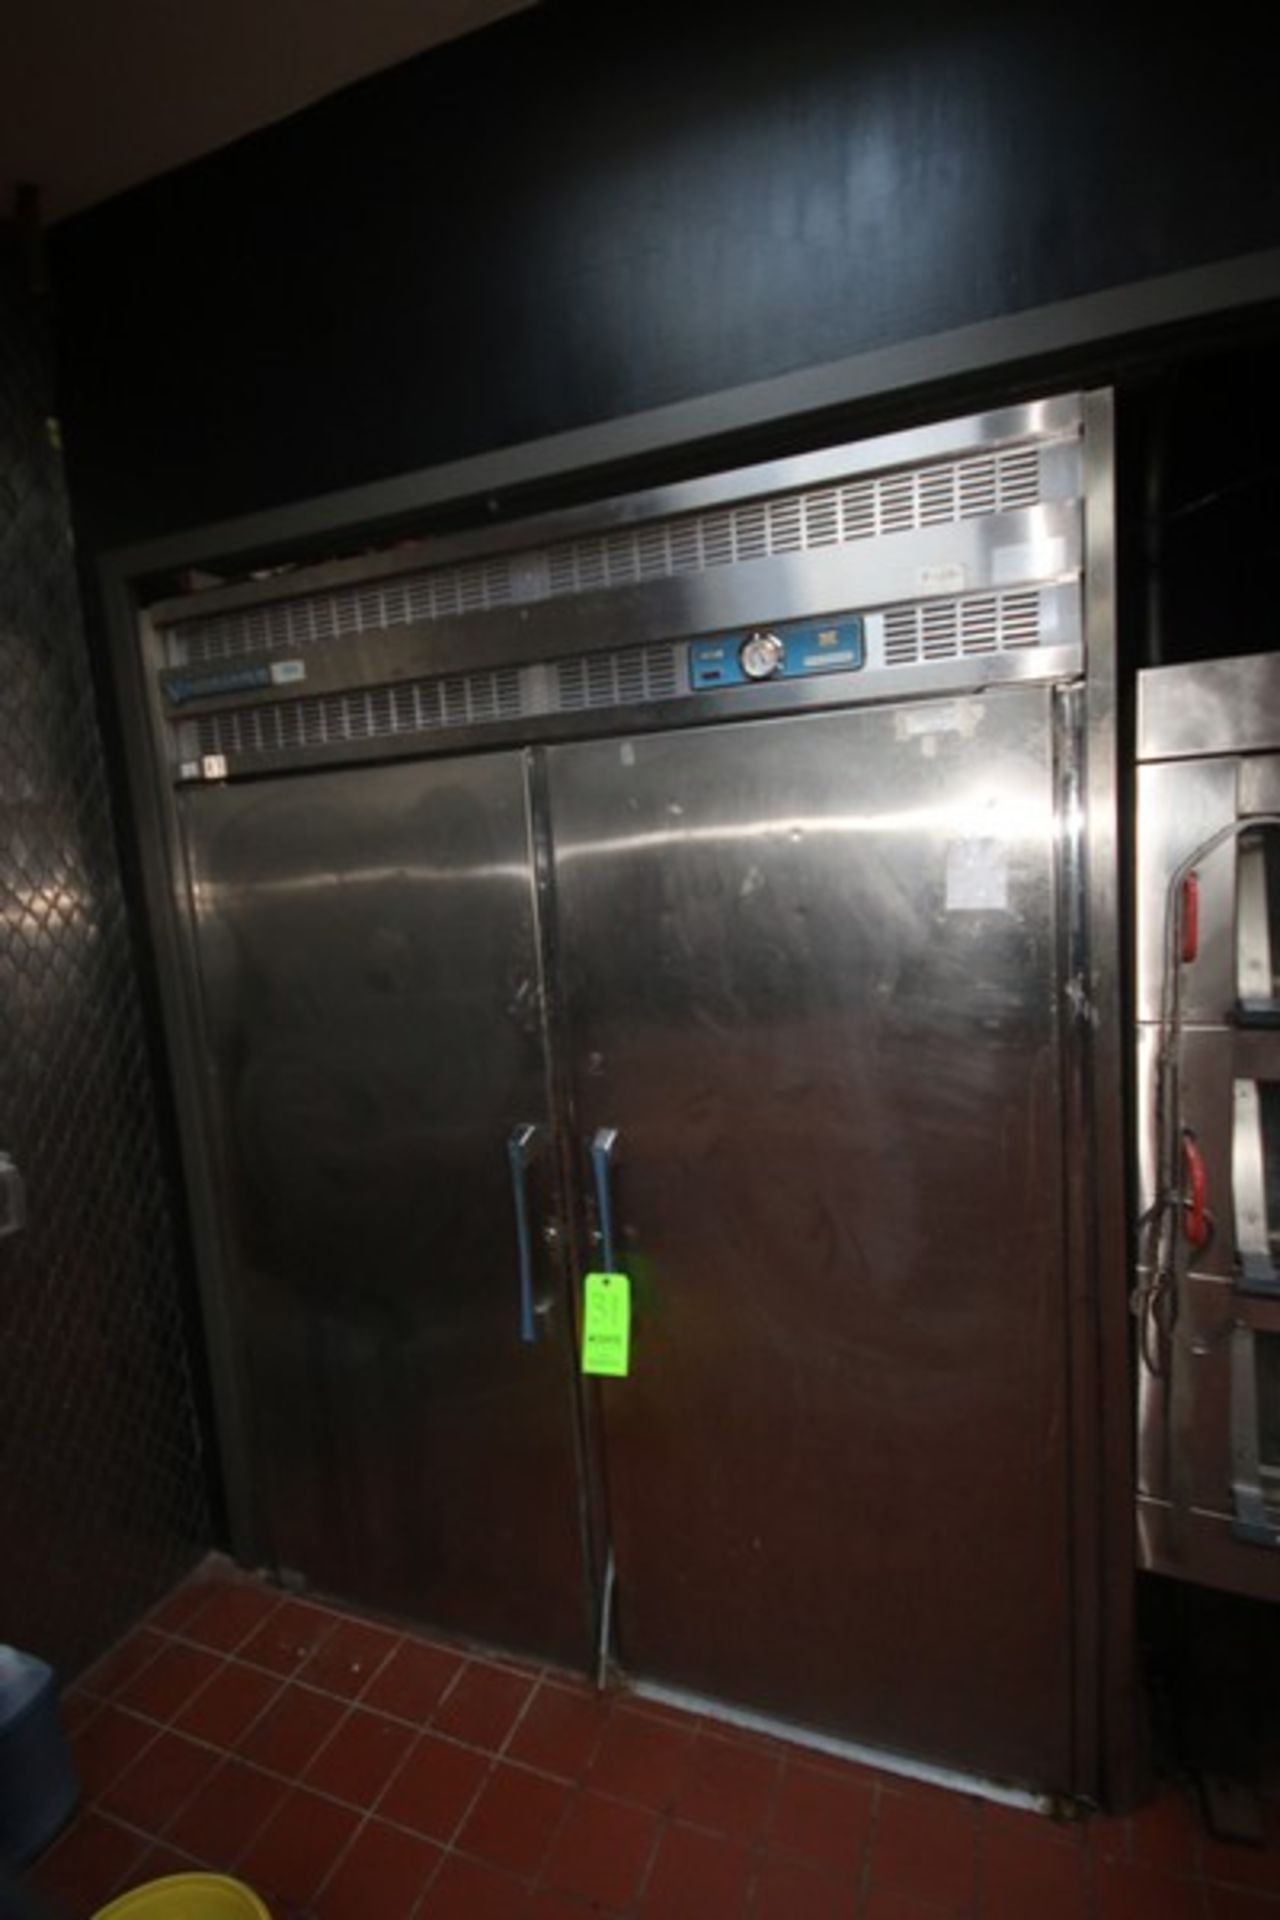 Victory 2-Door S/S Refrigerator, 2-Chambers Capable of 2-Racks Each, Overall Dims.: Aprox. 69" L x